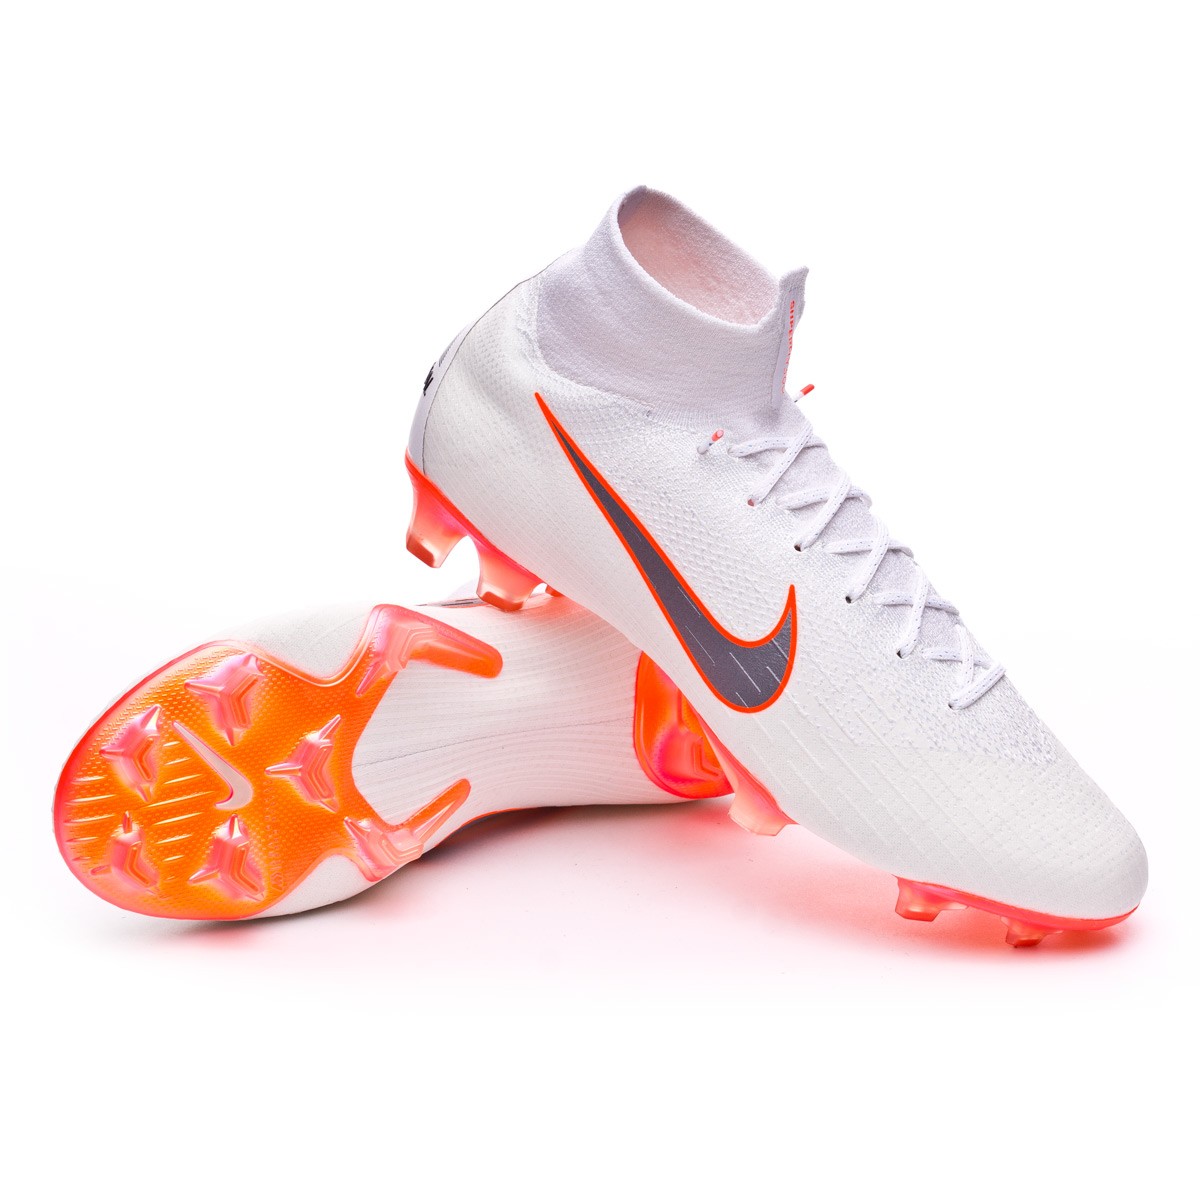 mercurial superfly 6 white